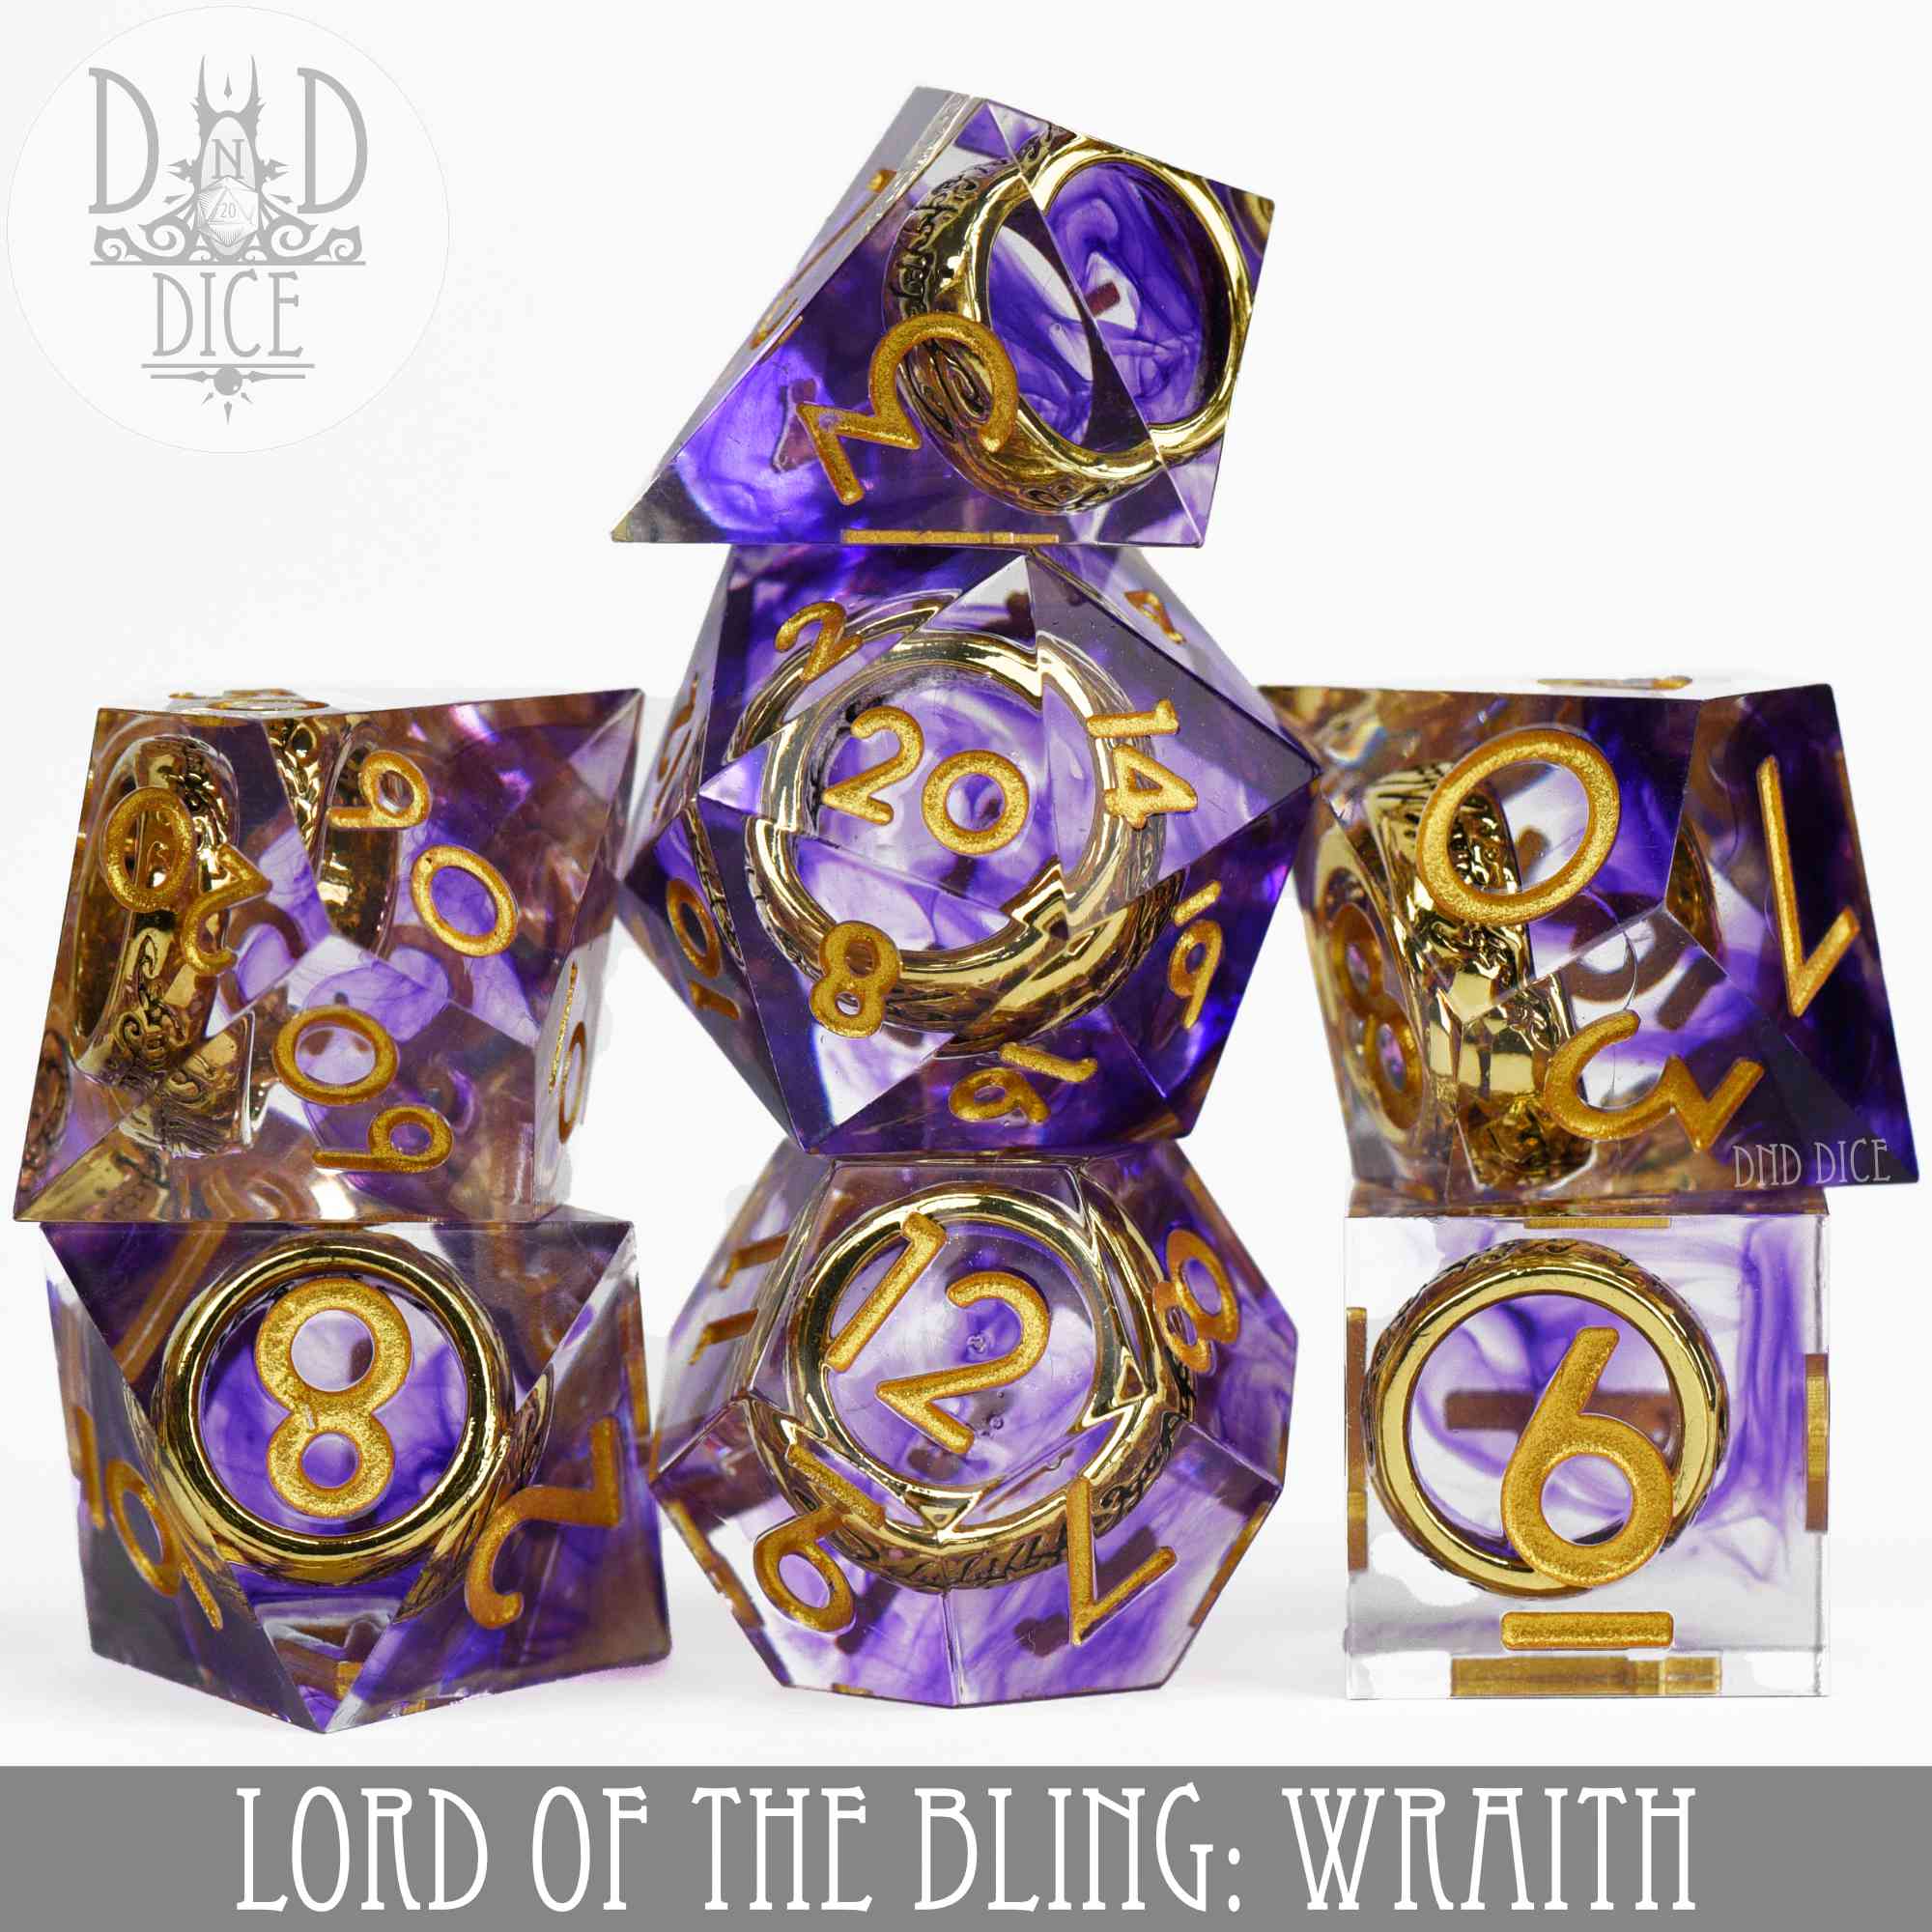 Lord of the Bling: Wraith Handmade Dice Set